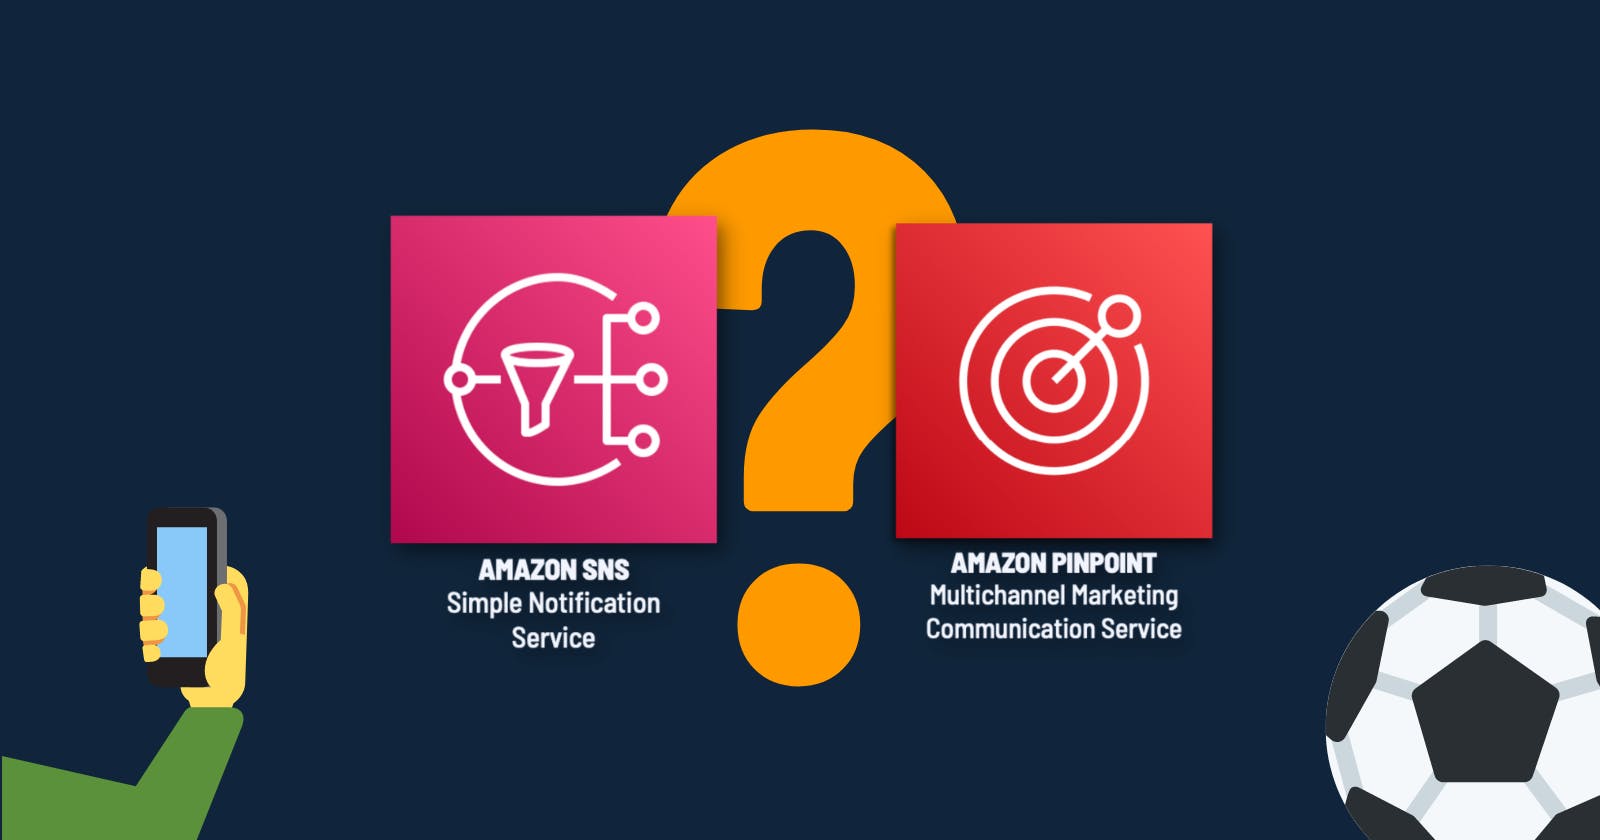 Why you should use Amazon Pinpoint for solving your engagement challenges